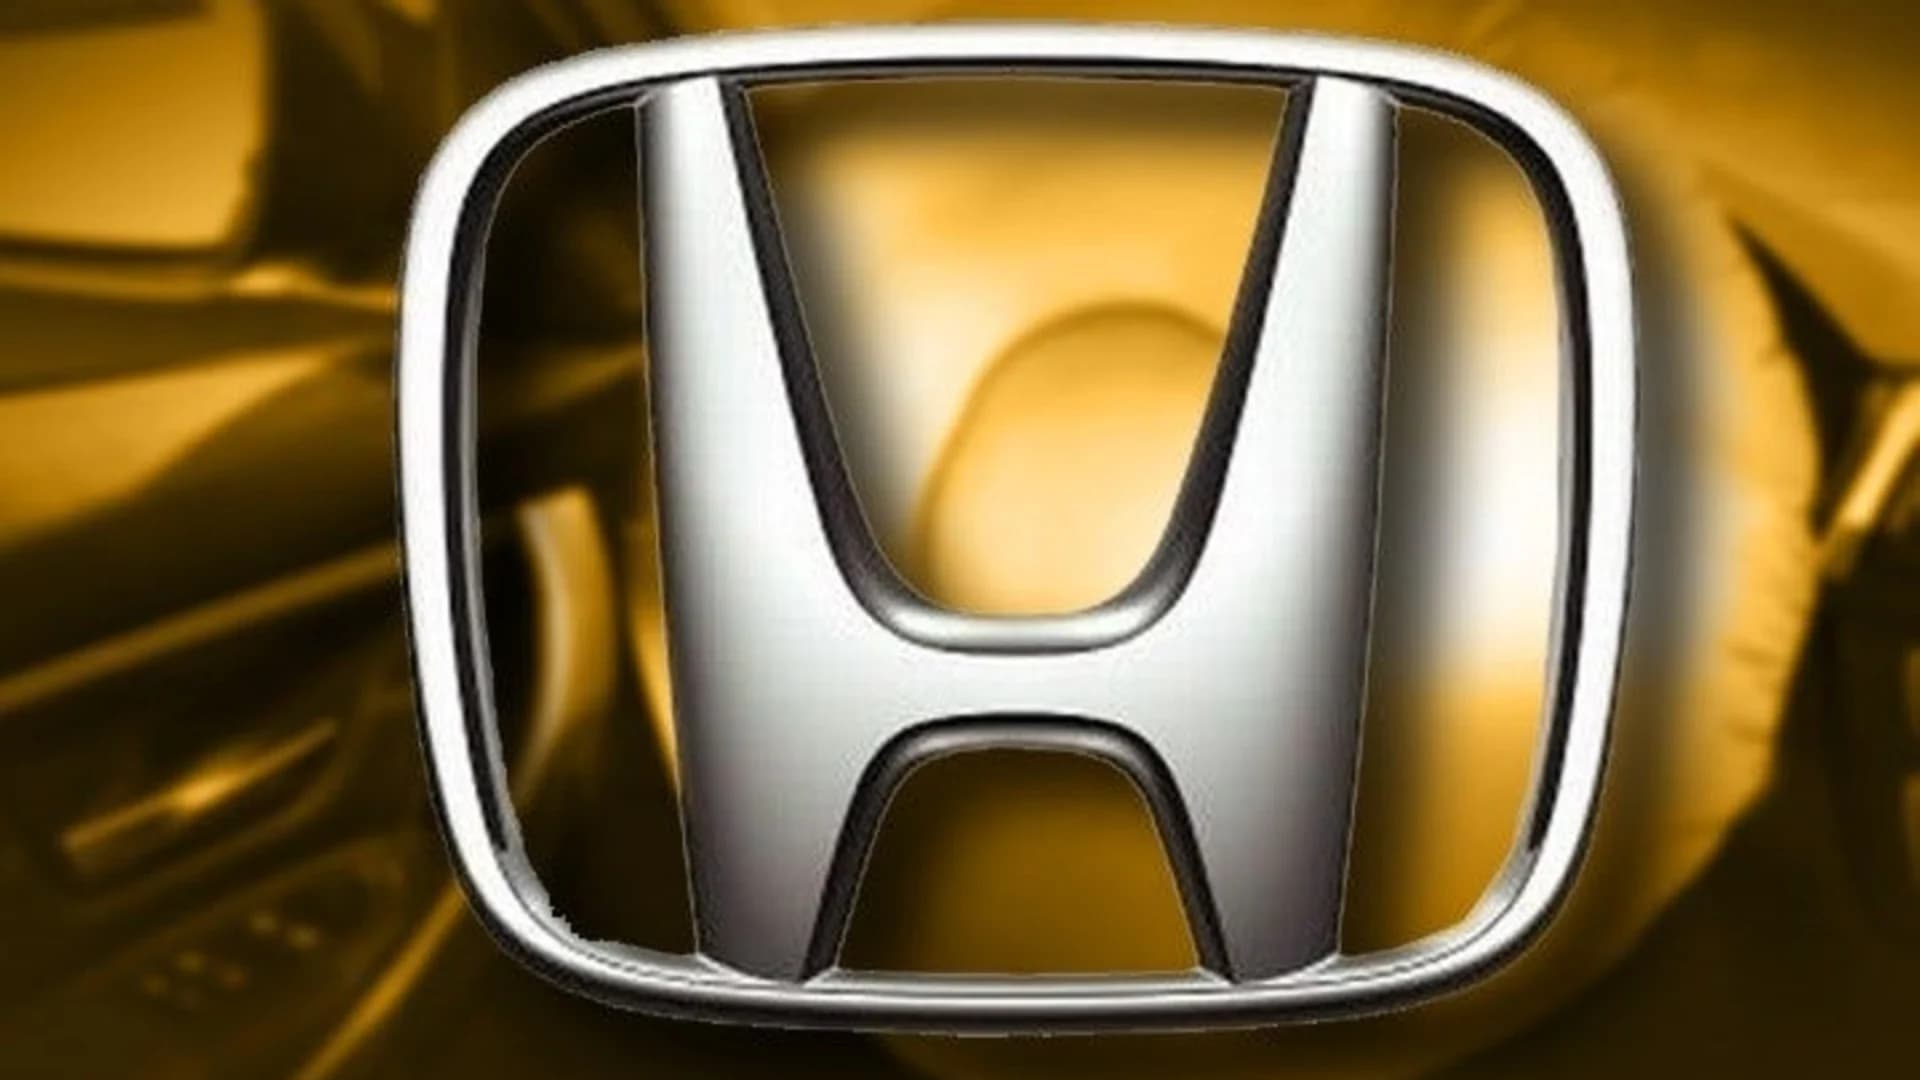 Honda recalls 1.6 million vehicles to replace potentially deadly Takata airbag inflators